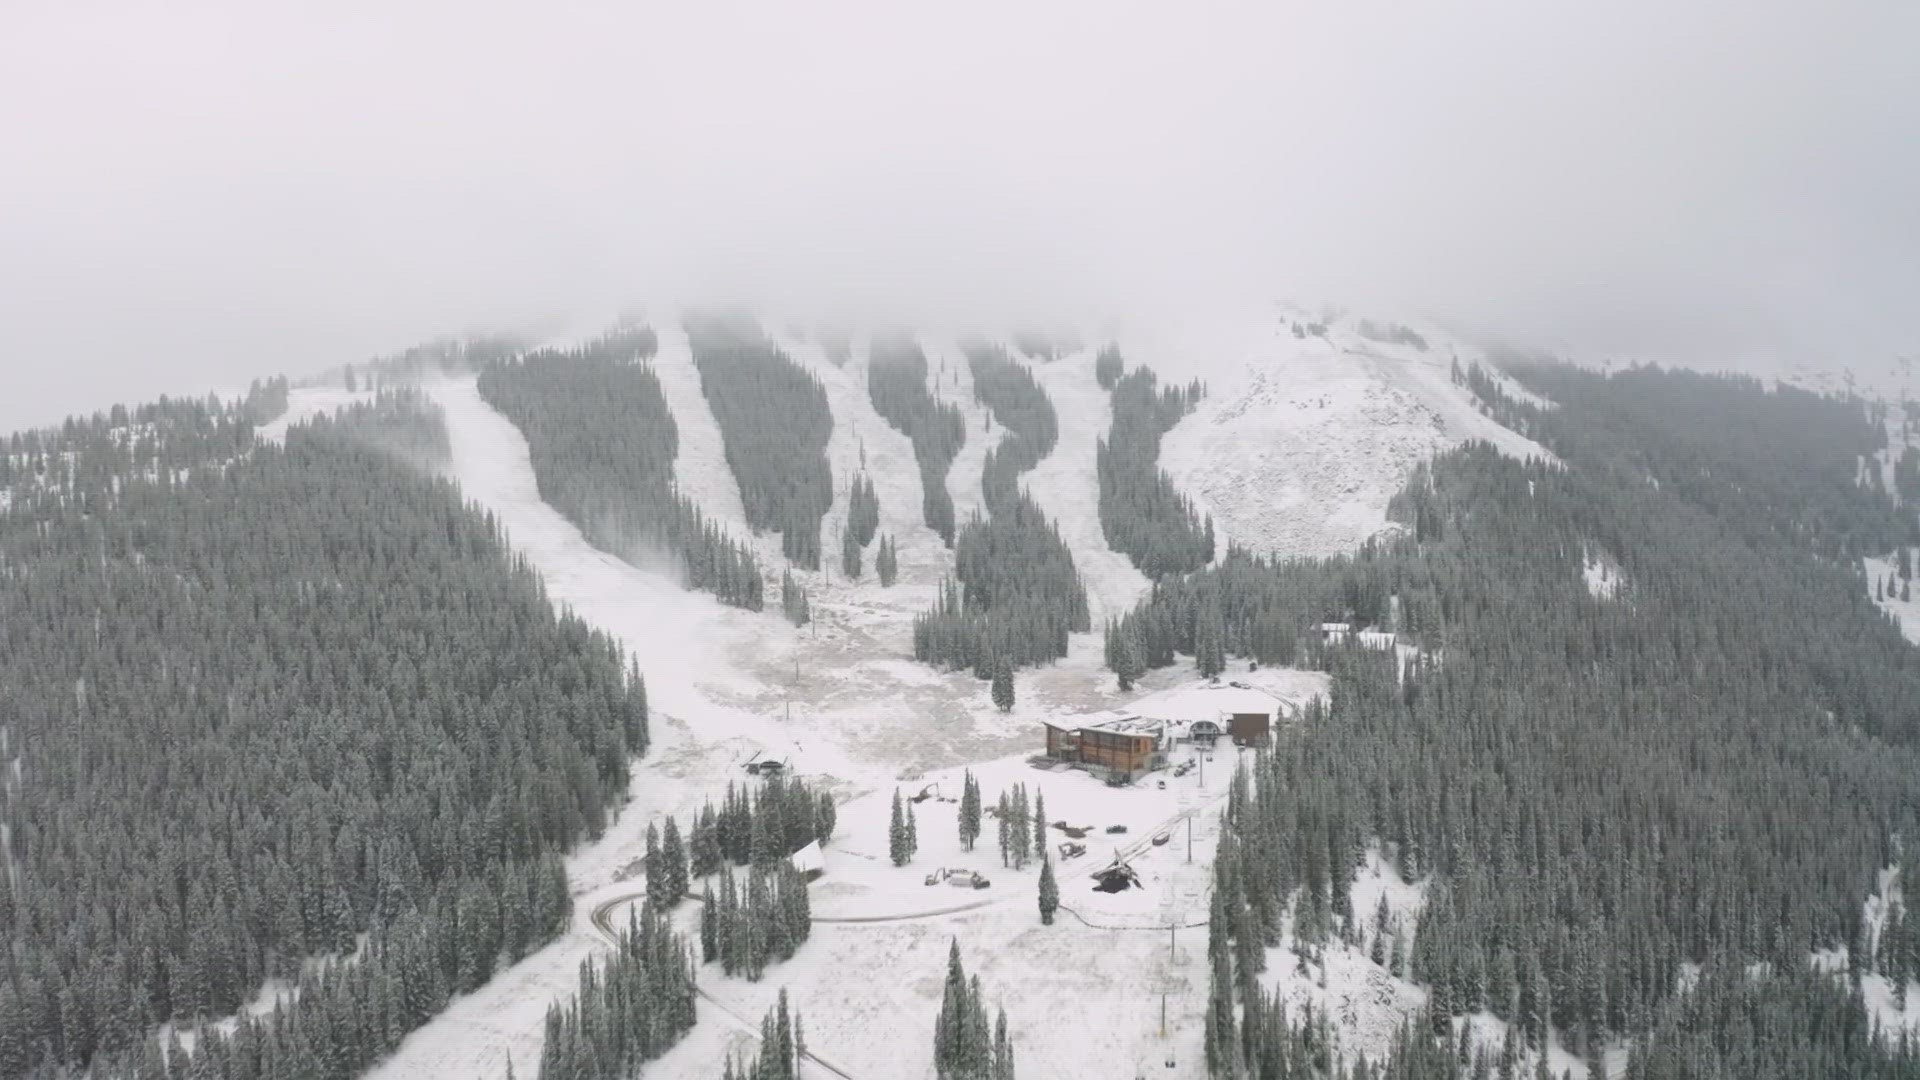 Snowmaking starts at Aspen Snowmass and natural snow accumulates at  mountaintops